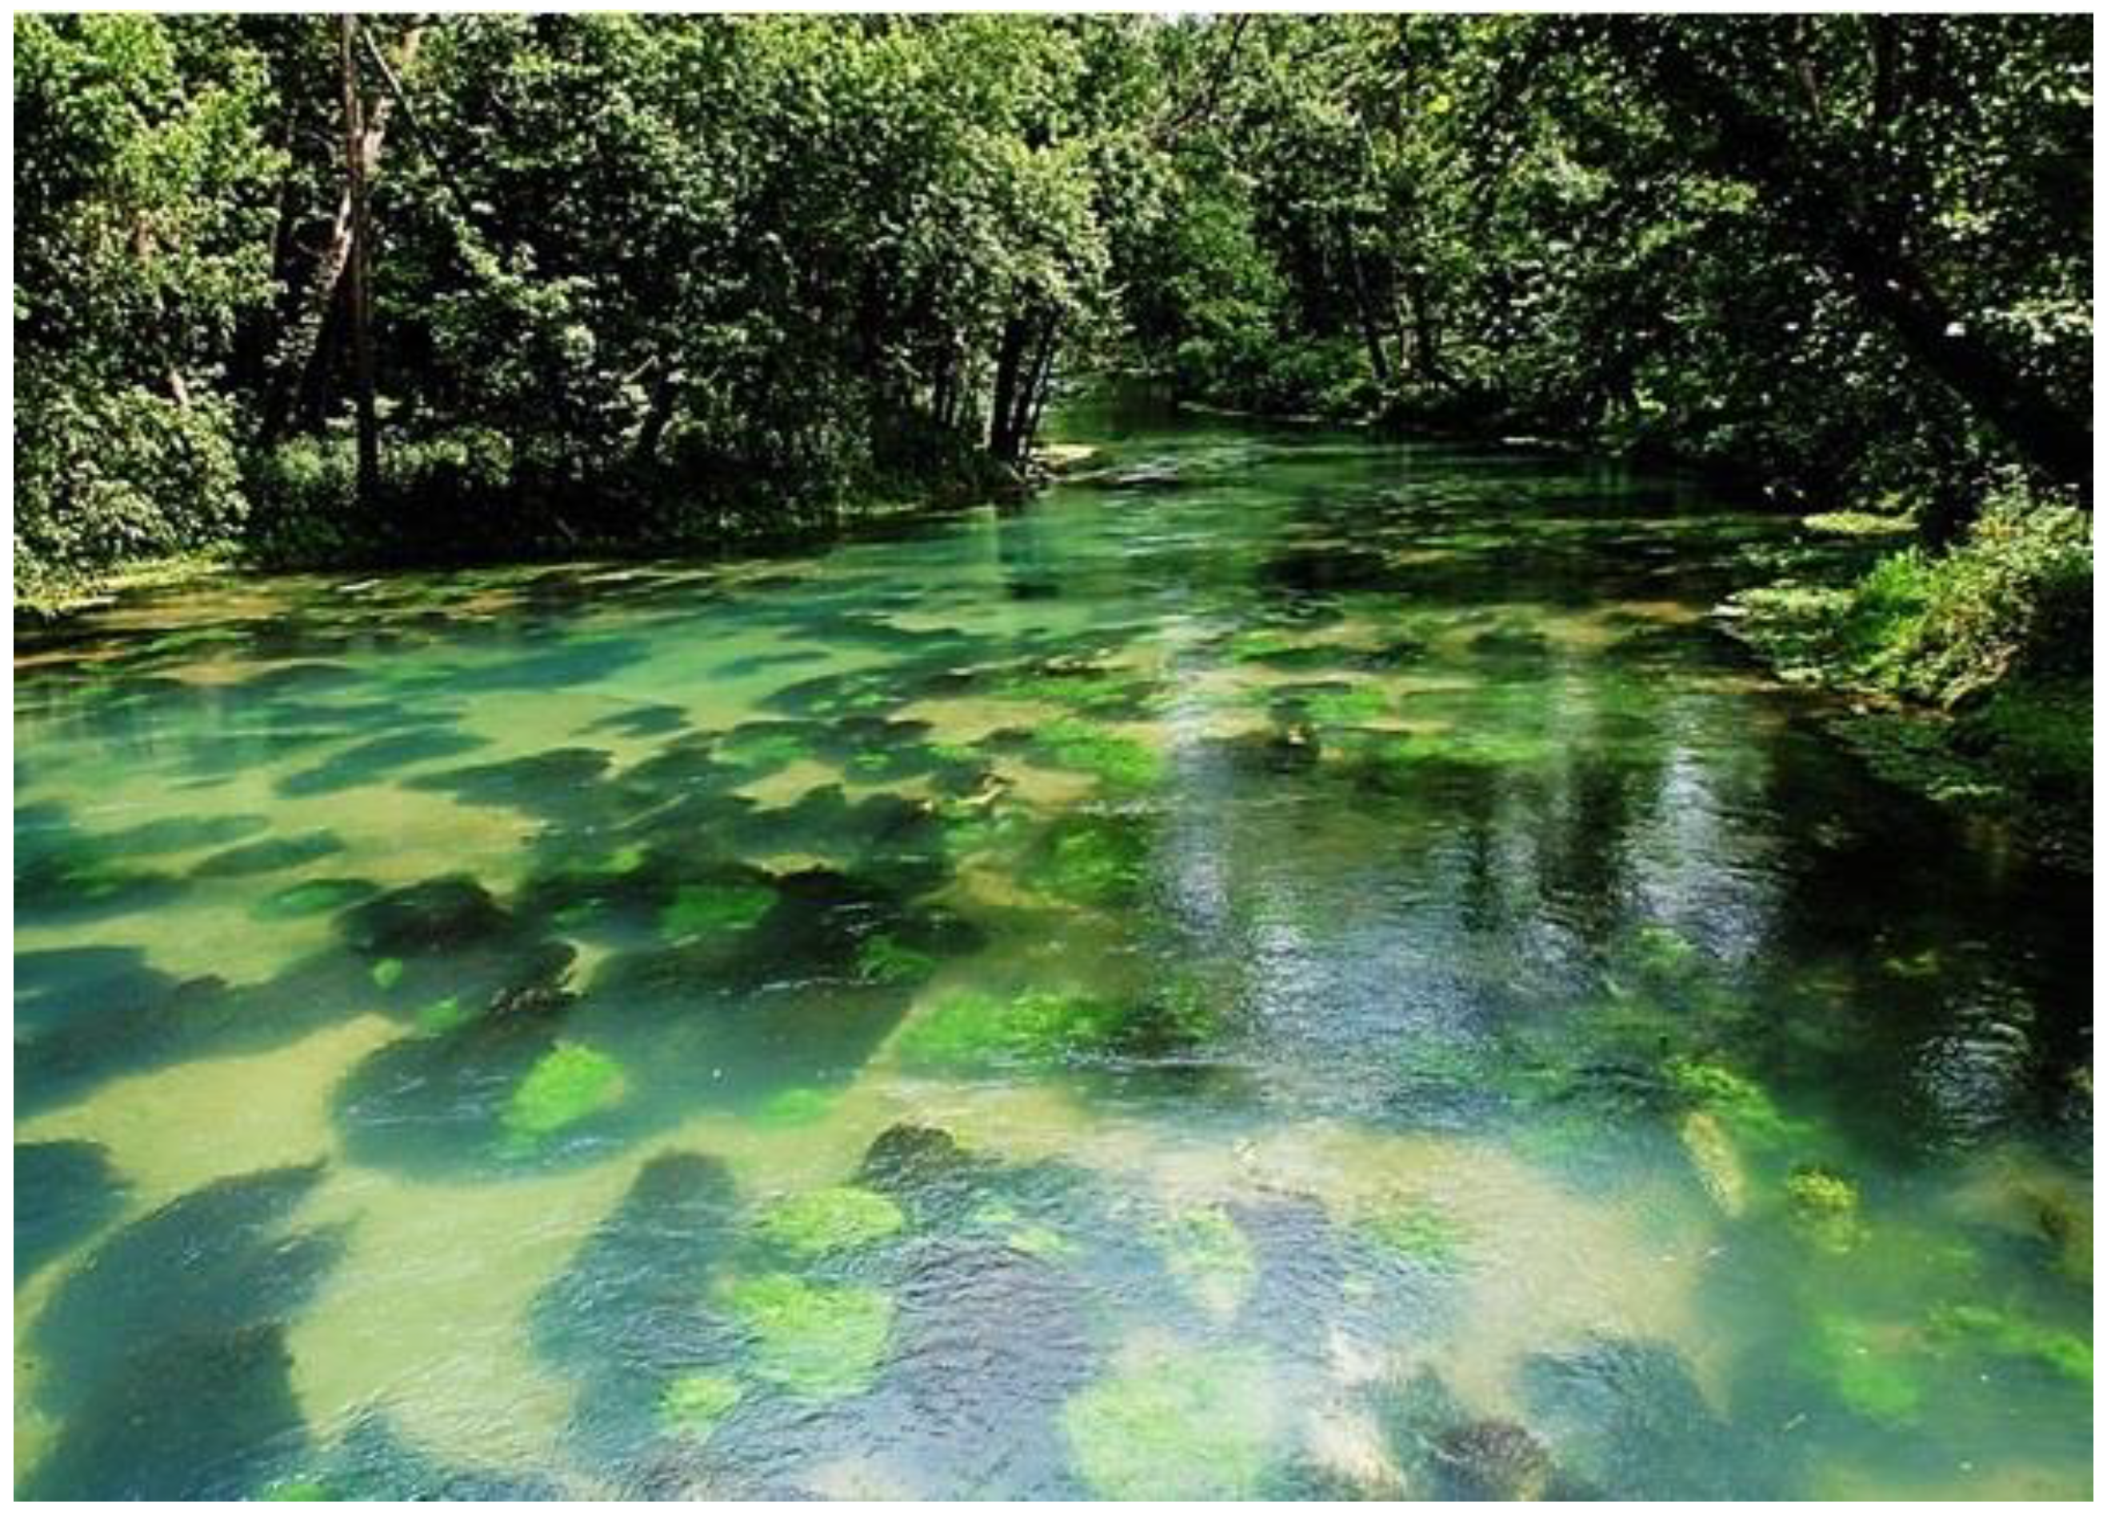 Hydrobiology Free Full Text Resiliency And Recovery Of Aquatic Vegetation Following Scouring Floods In Two First Magnitude Springs Missouri Usa Html